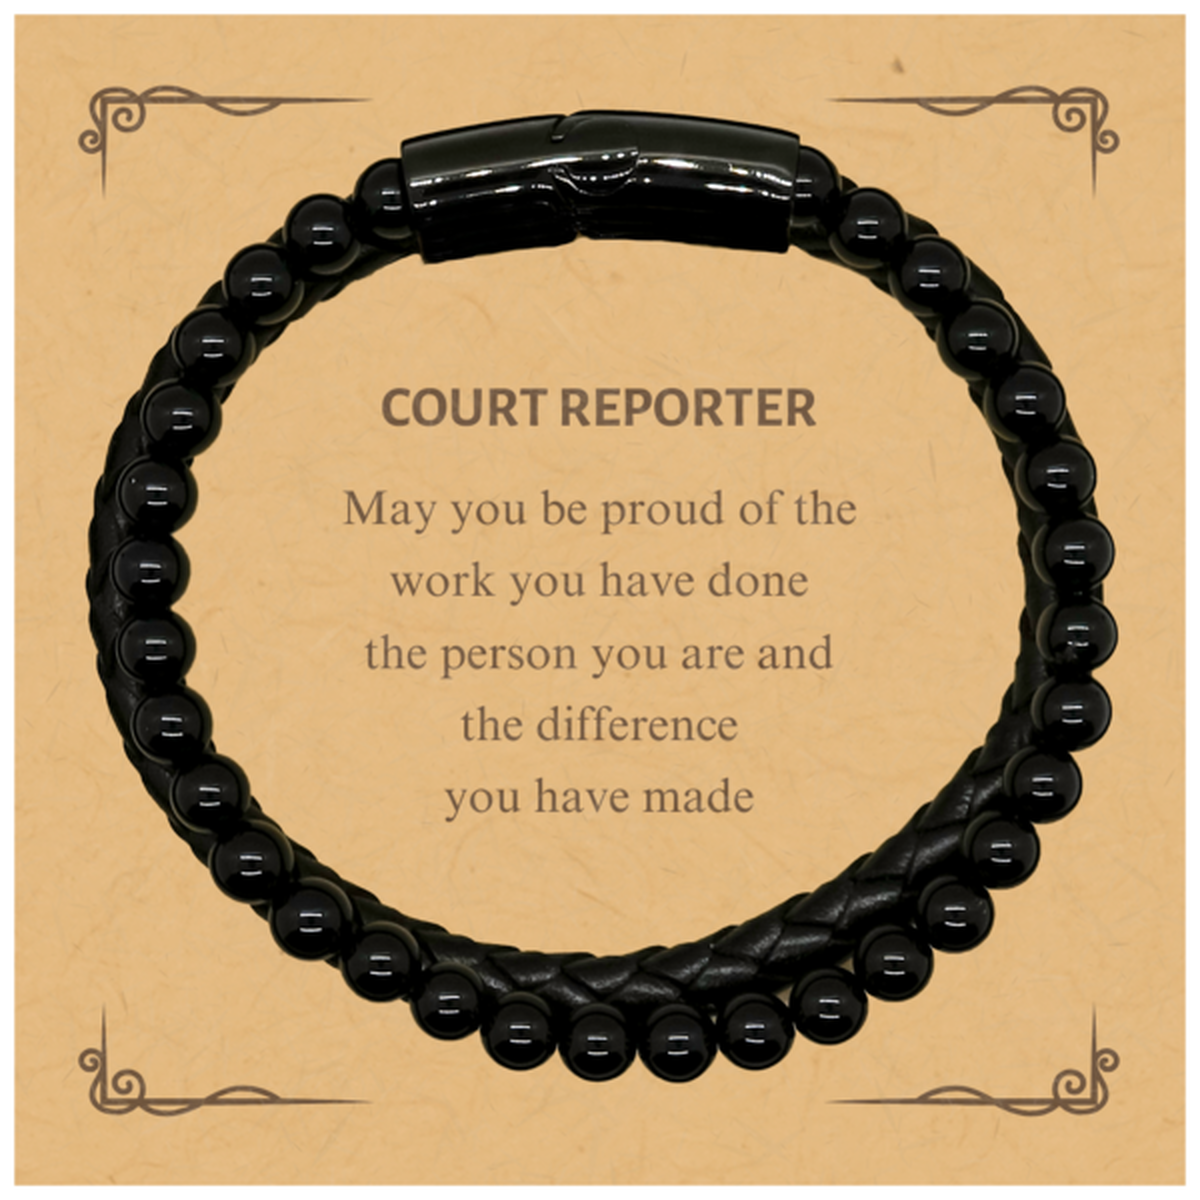 Court Reporter May you be proud of the work you have done, Retirement Court Reporter Stone Leather Bracelets for Colleague Appreciation Gifts Amazing for Court Reporter